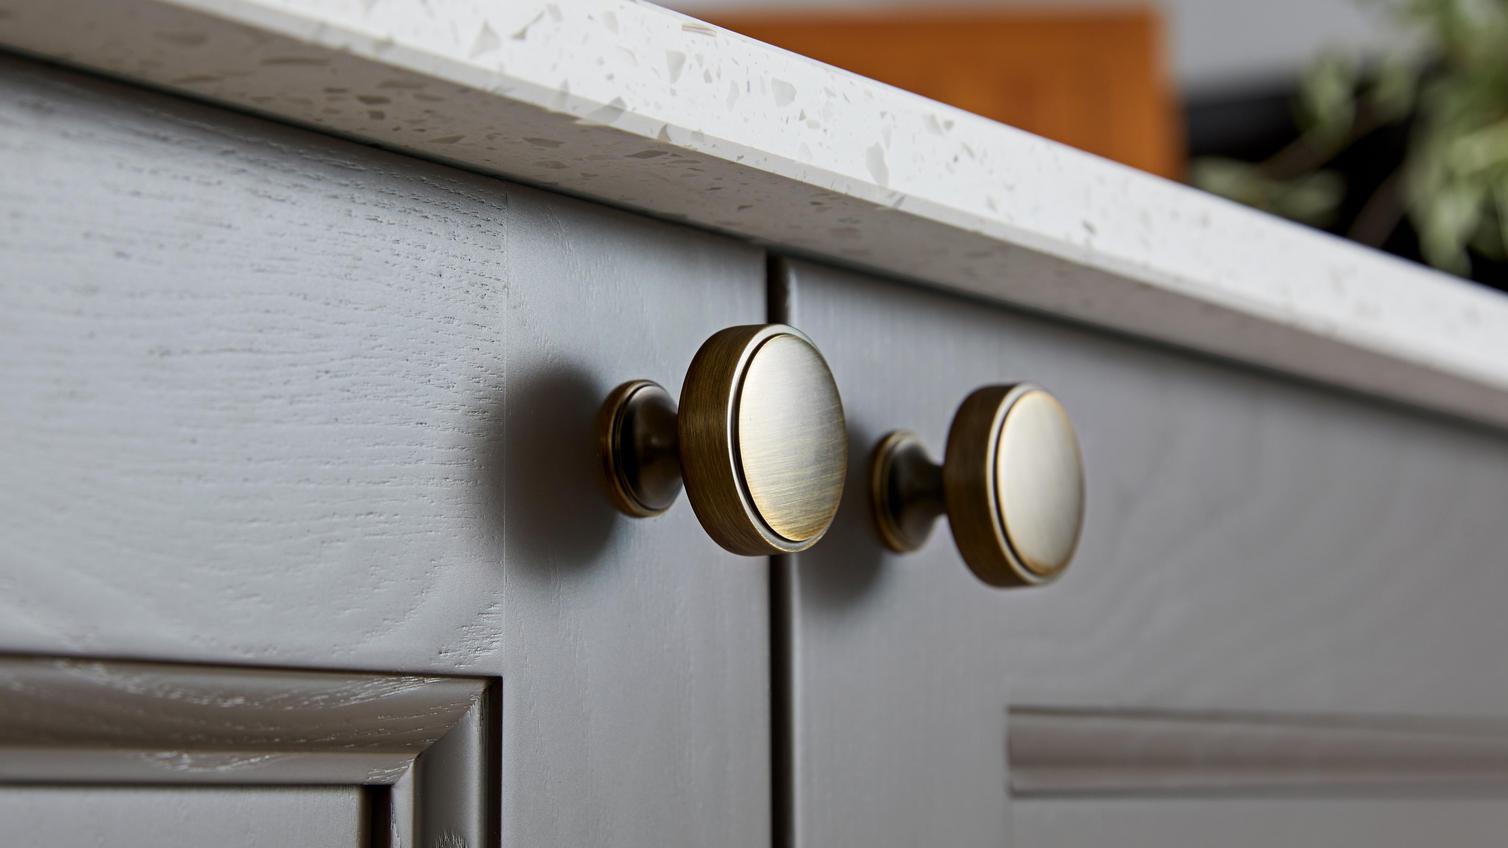 Antique brass cabinet door knobs on a brown shaker kitchen door. Above the cabinet is a white acrylic worktop.